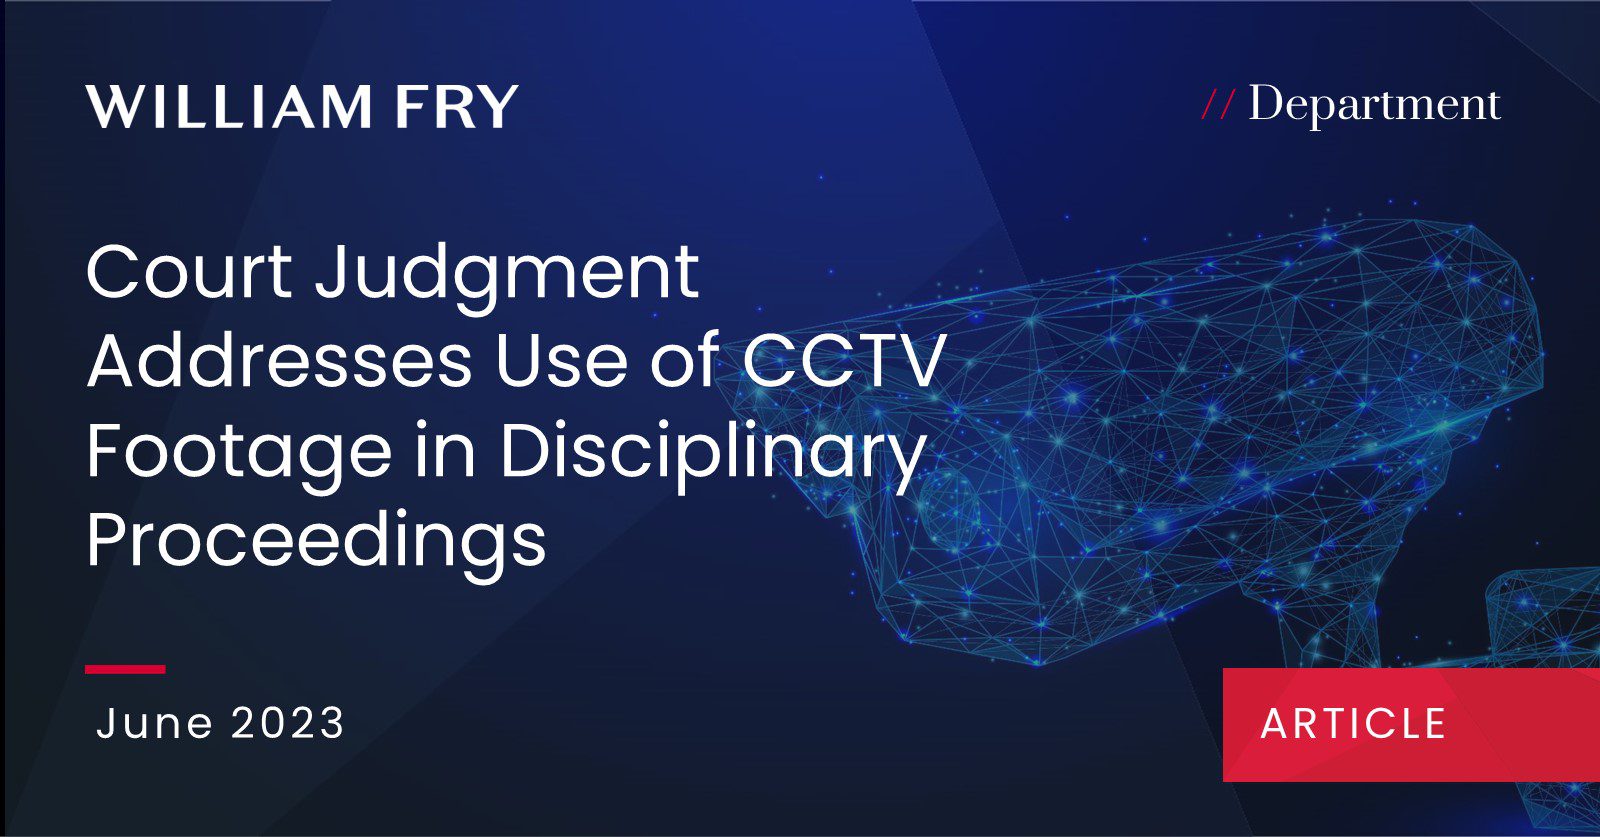 Court Judgment Addresses Use of CCTV Footage in Disciplinary Proceedings